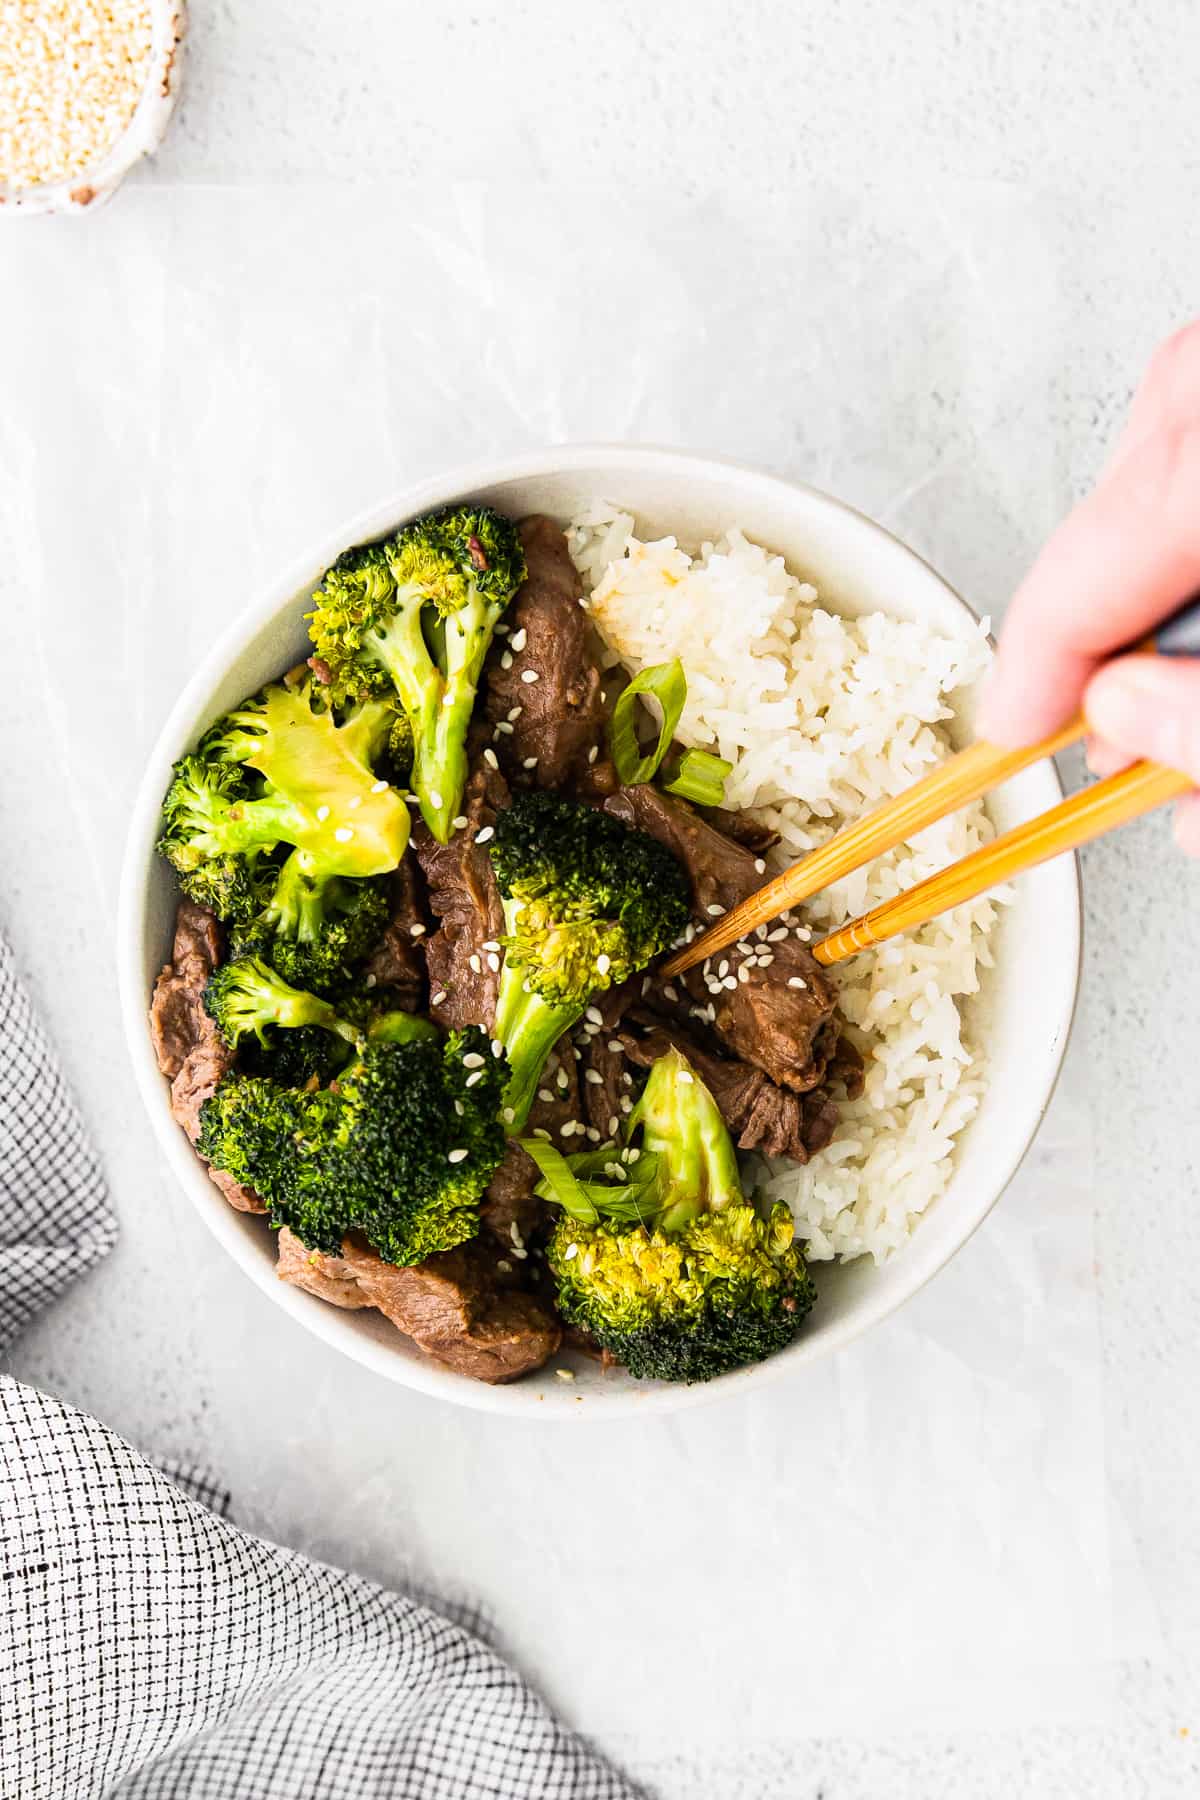 hands using chopsticks placed in a bowl of beef, broccoli, and rice